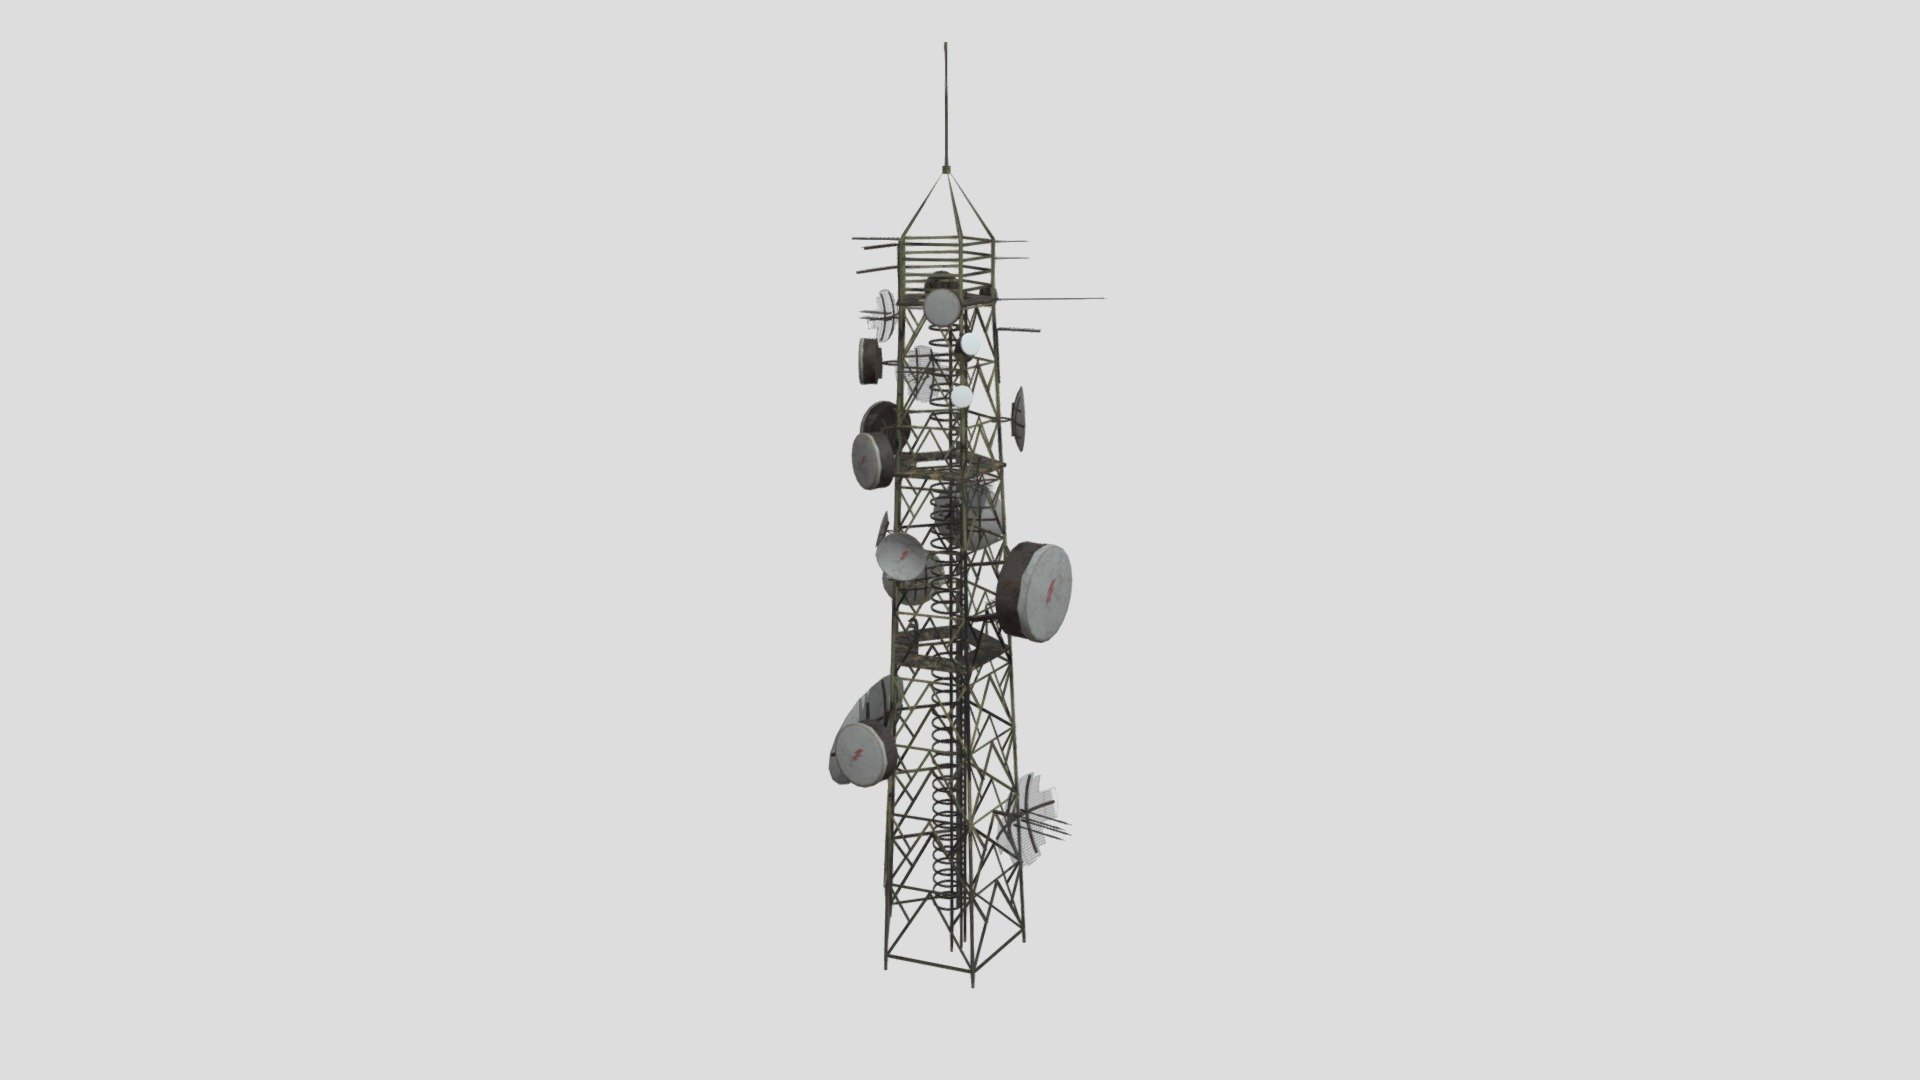 Highly detailed 3d model of antenna&nbsp;towers with all textures, shaders and materials. This 3d model is ready to use, just put it into your scene 3d model